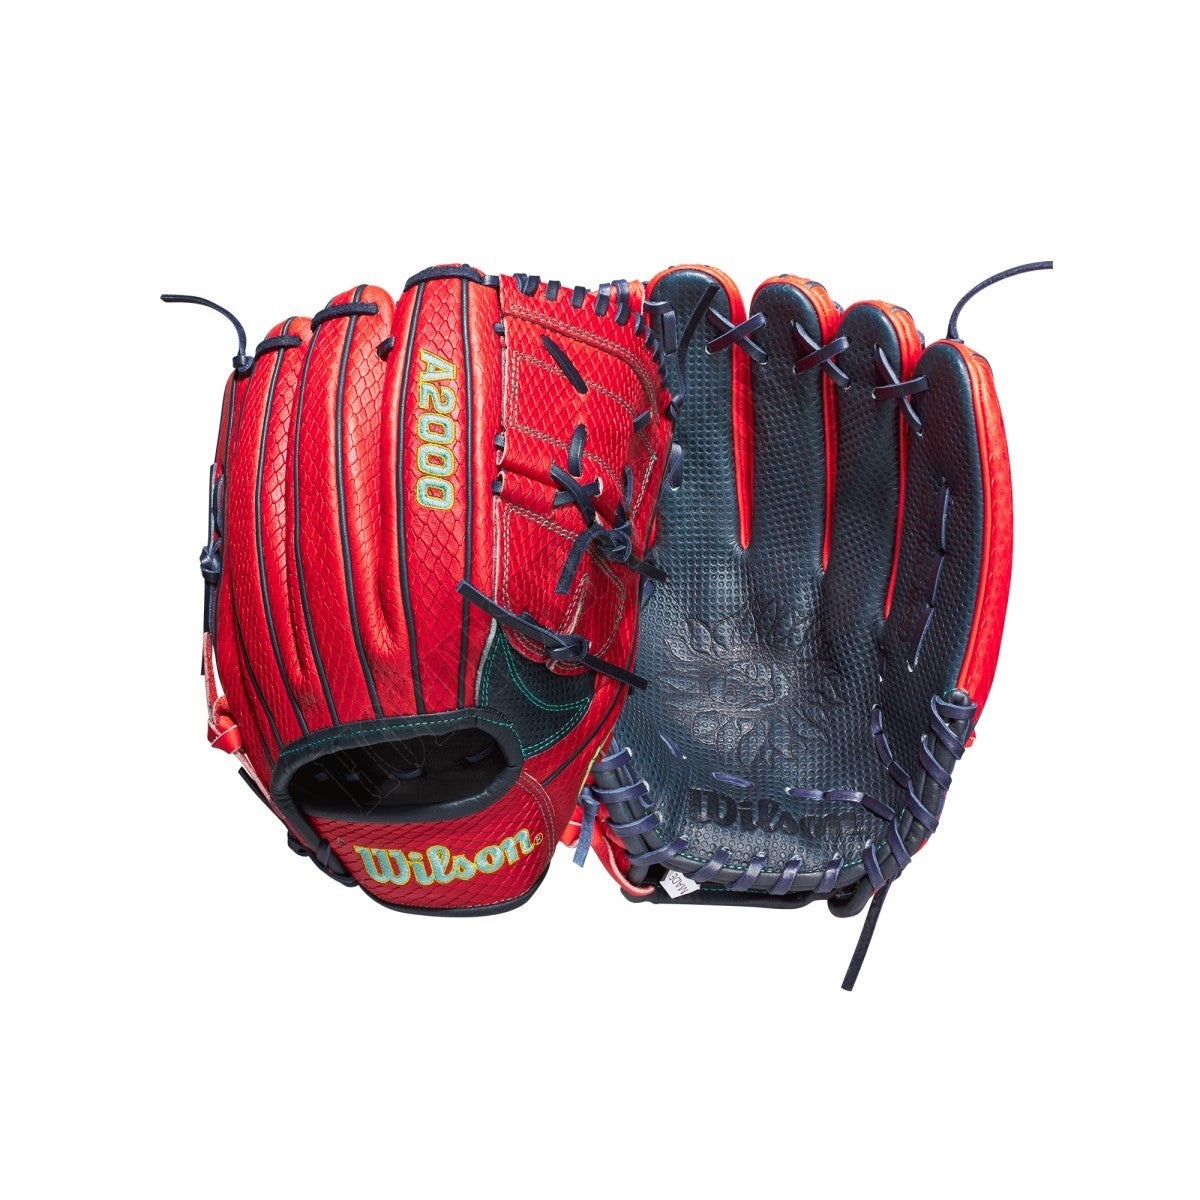 2021 A2000 B2 12" Mike Clevinger Game Model Pitcher's Baseball Glove ● Wilson Promotions - 2021 A2000 B2 12" Mike Clevinger Game Model Pitcher's Baseball Glove ● Wilson Promotions